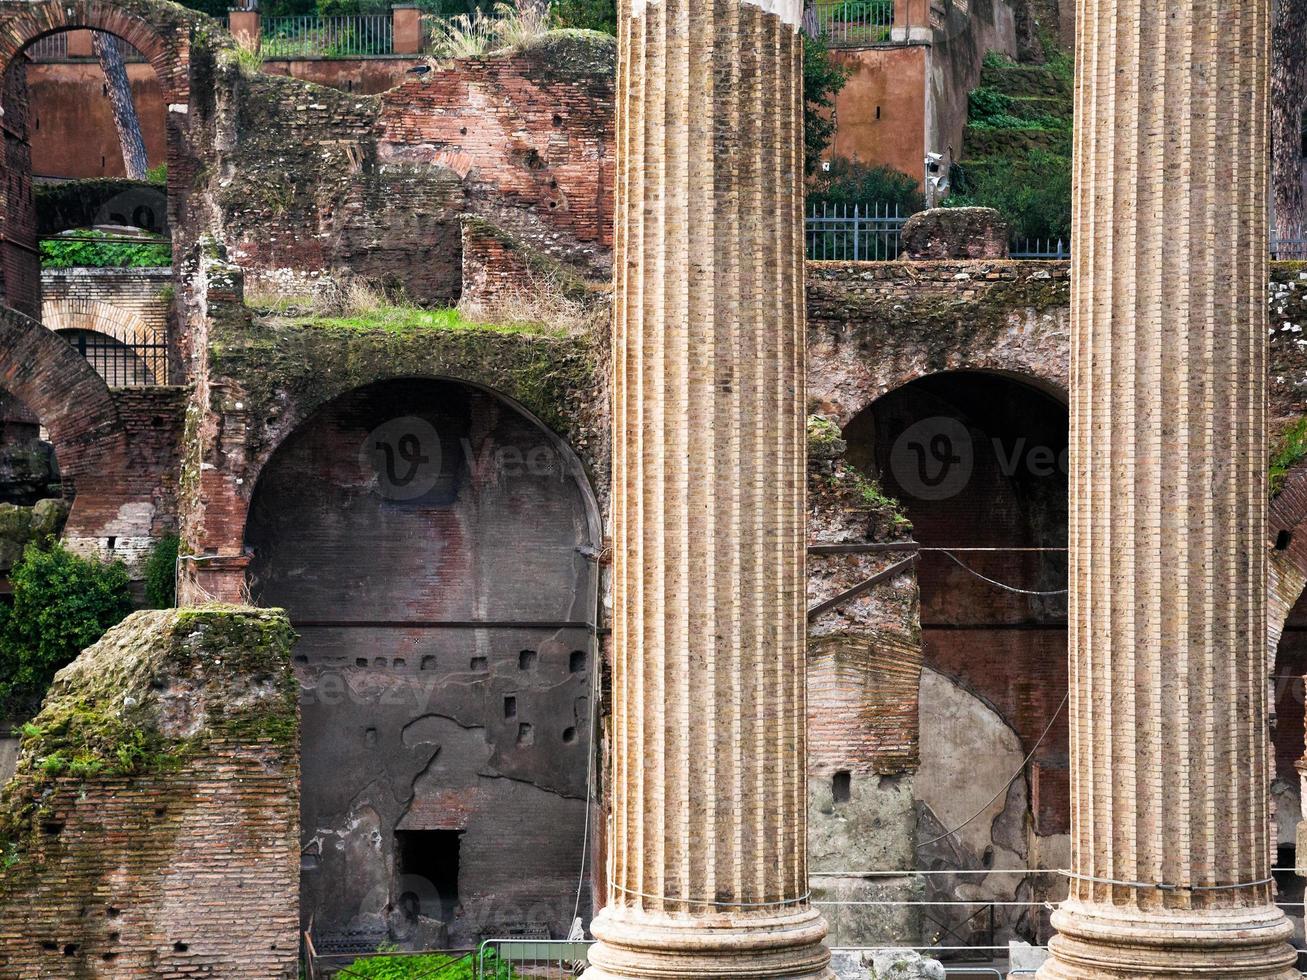 columns and ruins on Capitoline Hill, Rome, photo